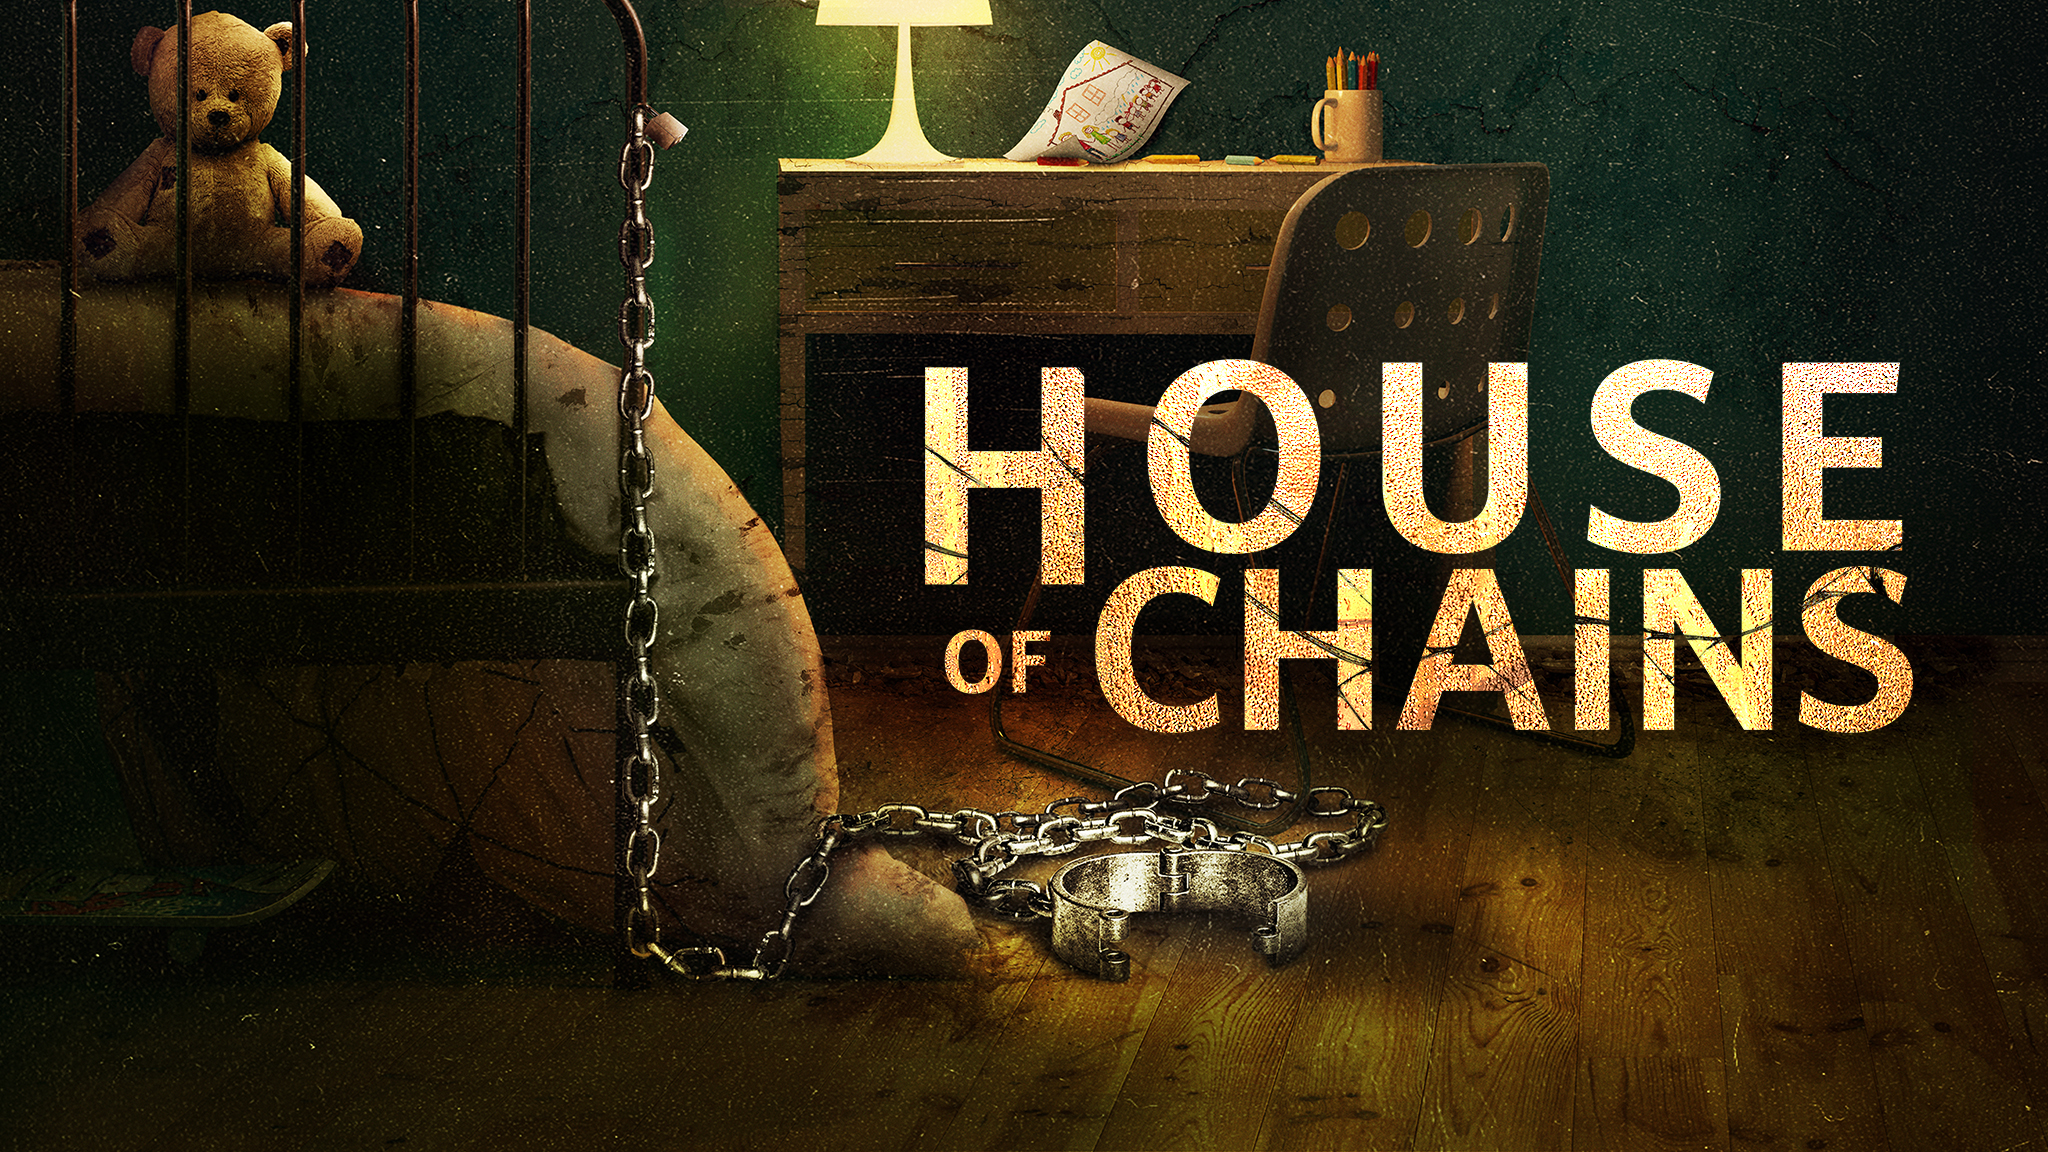 House of Chains